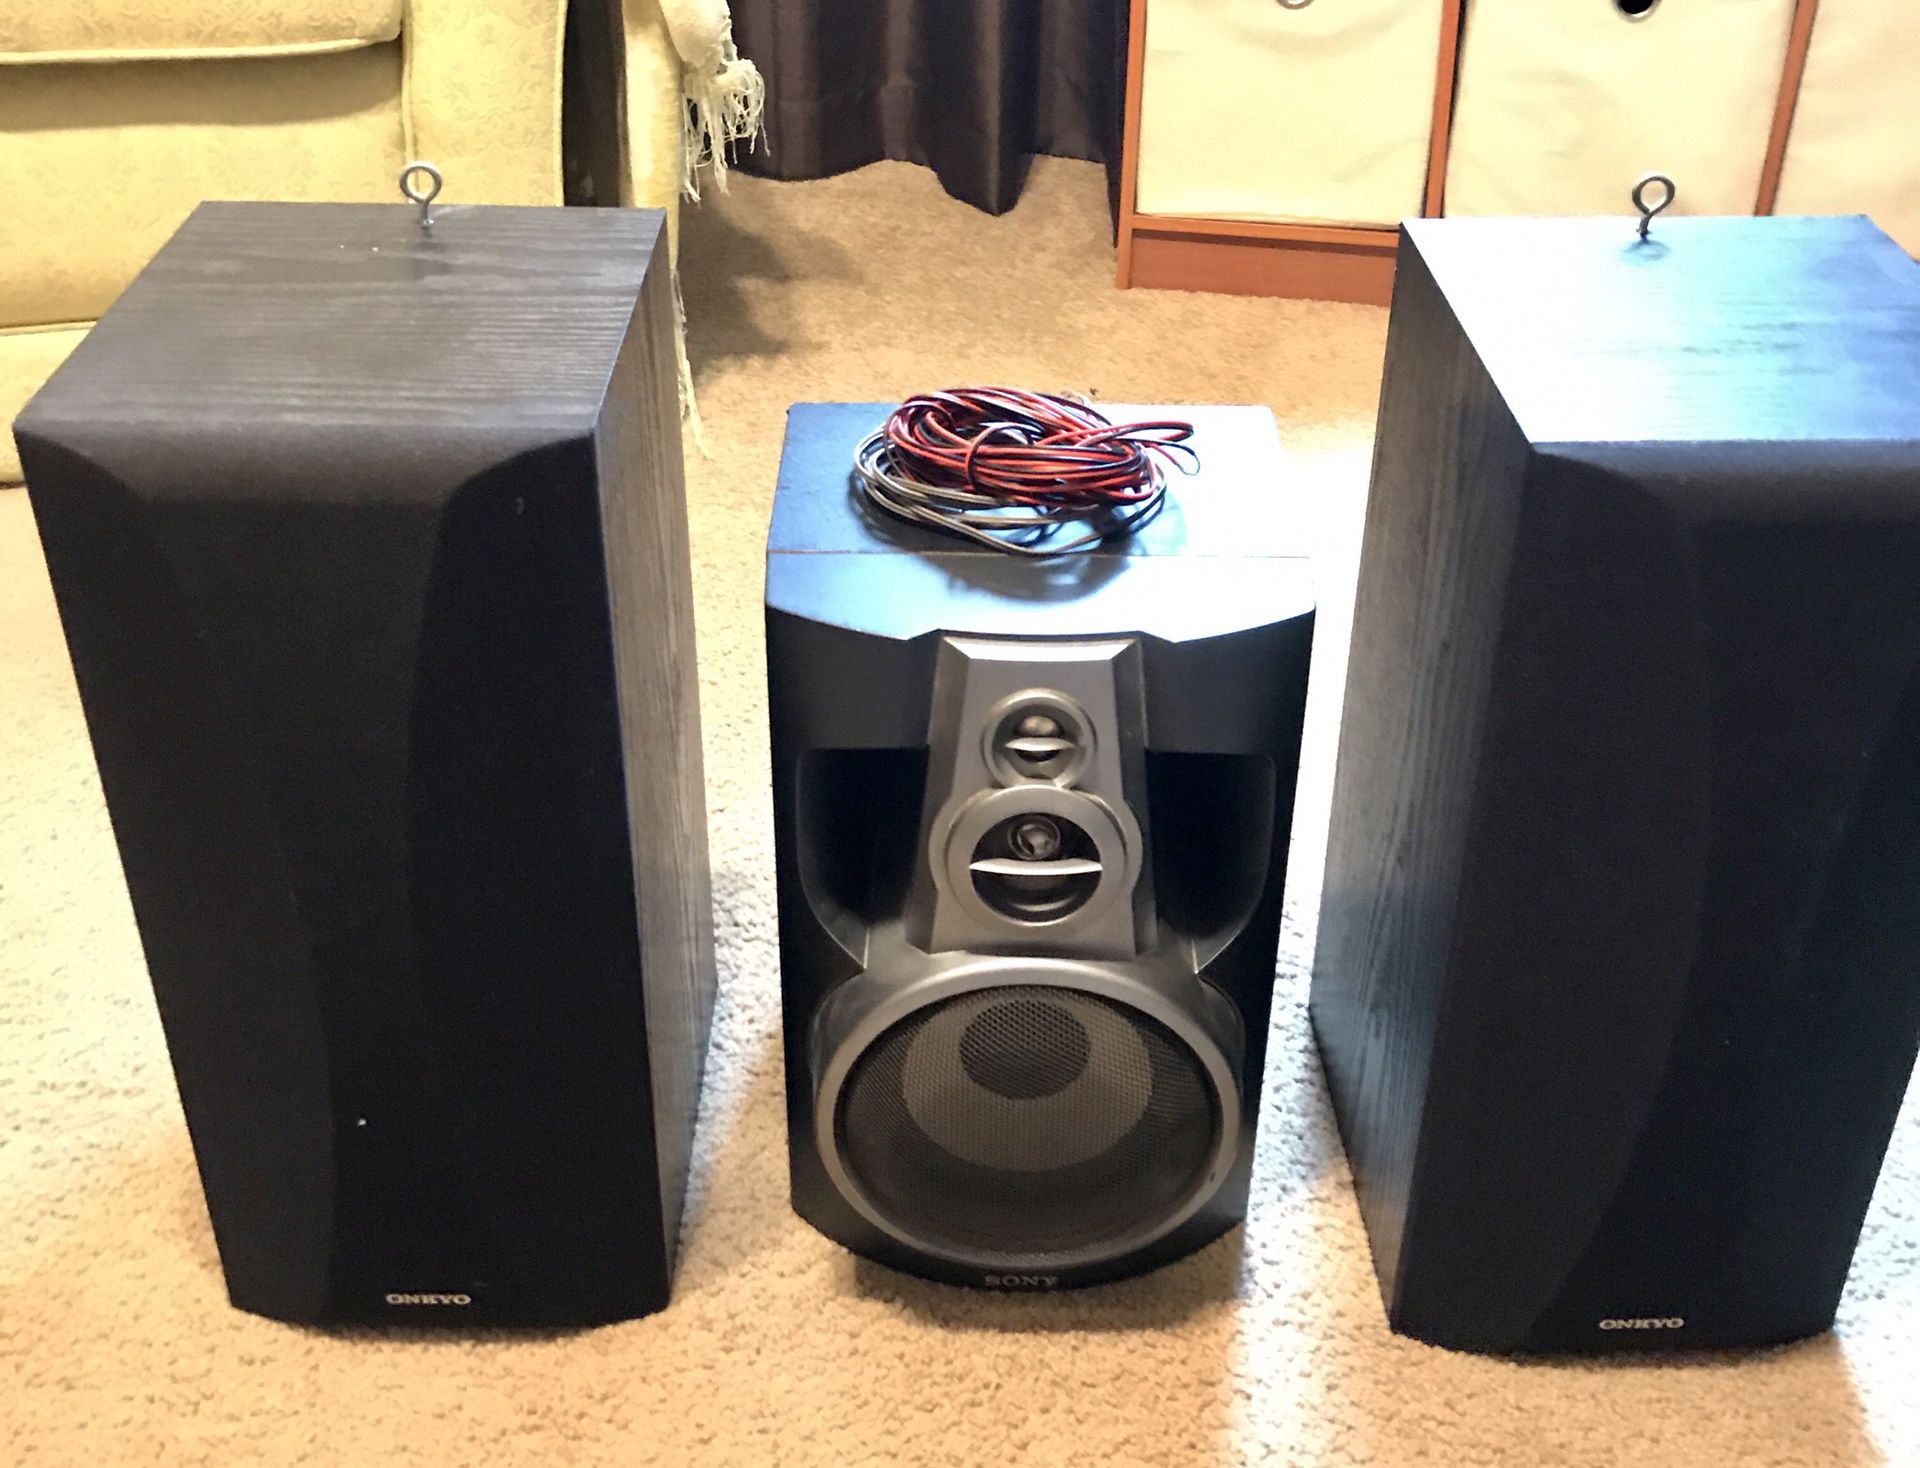 2 Onkyo speakers and a center speaker with speaker wire!